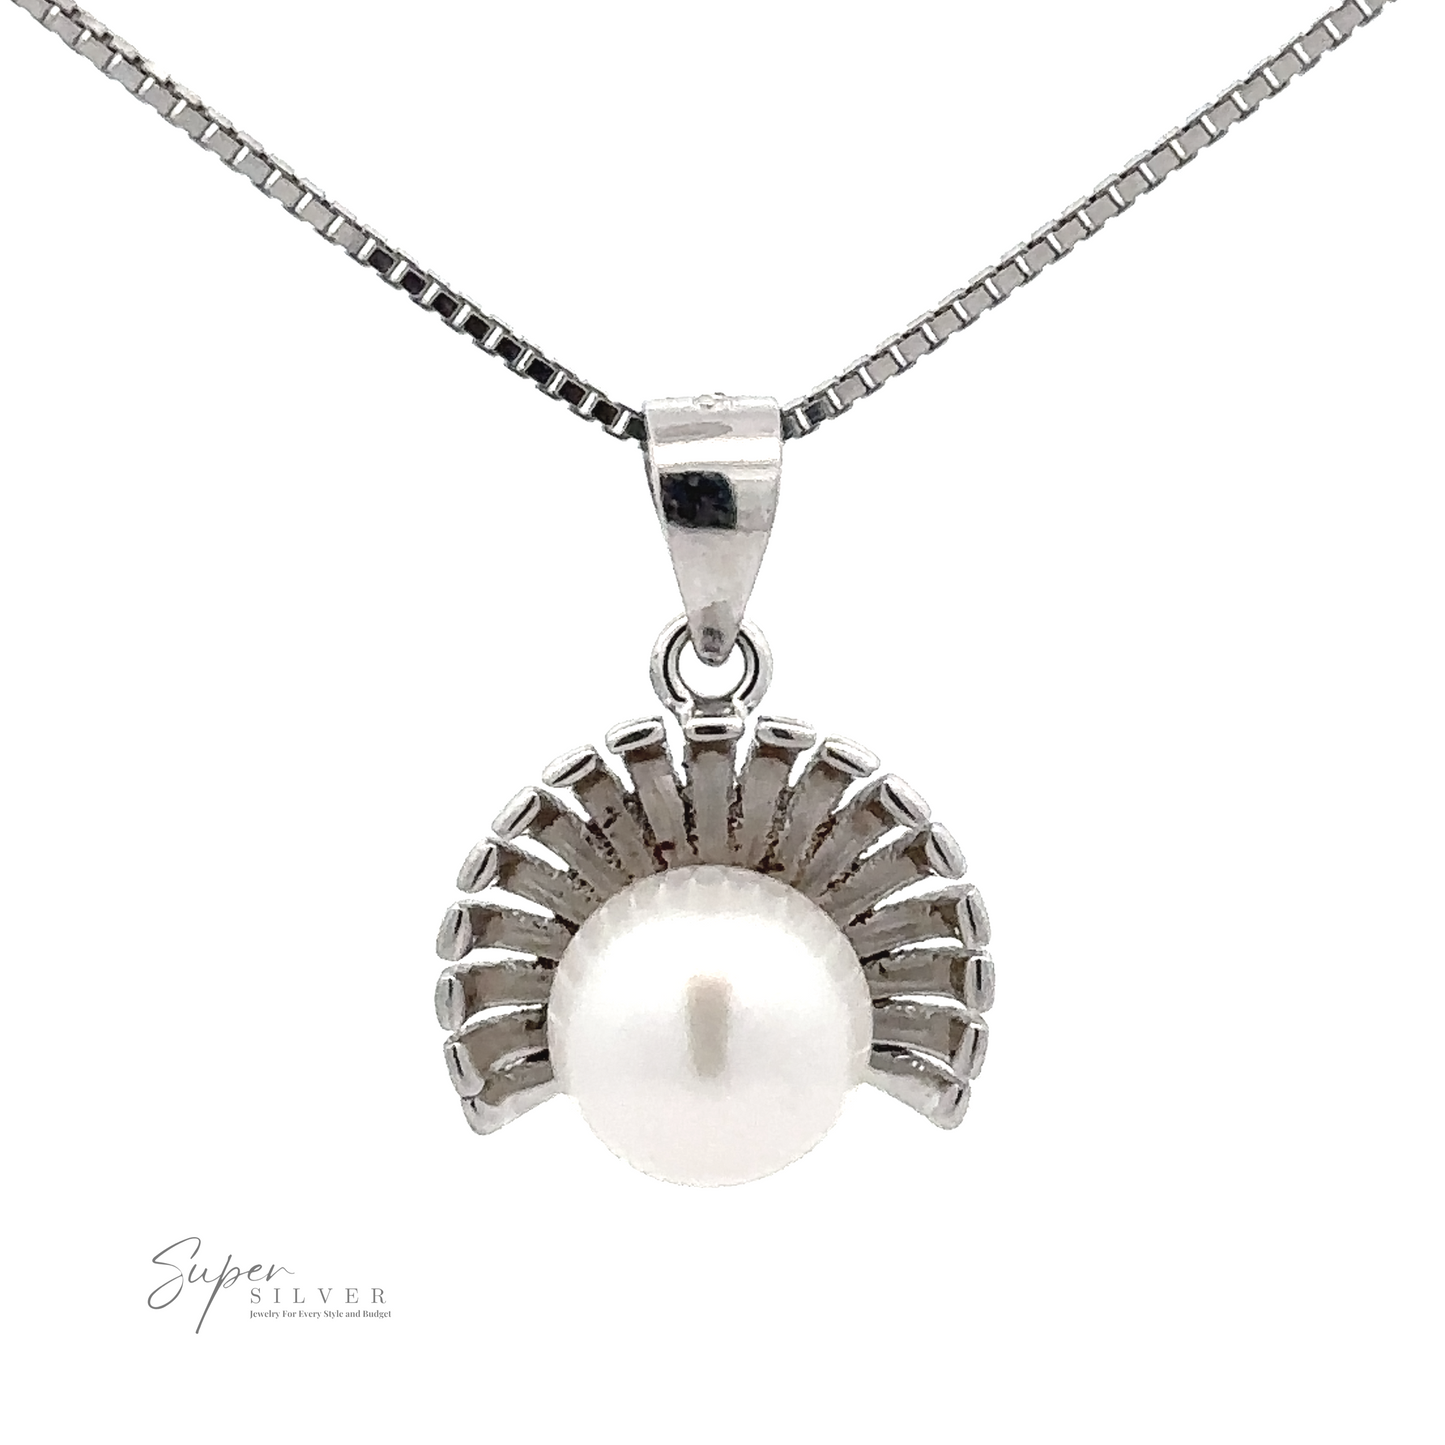 A Pearl Pendant with Shell Background featuring a fresh water pearl encircled by a petite half shell design. The chain is a box-link style. The branding "Super Silver" is visible in the bottom left corner.